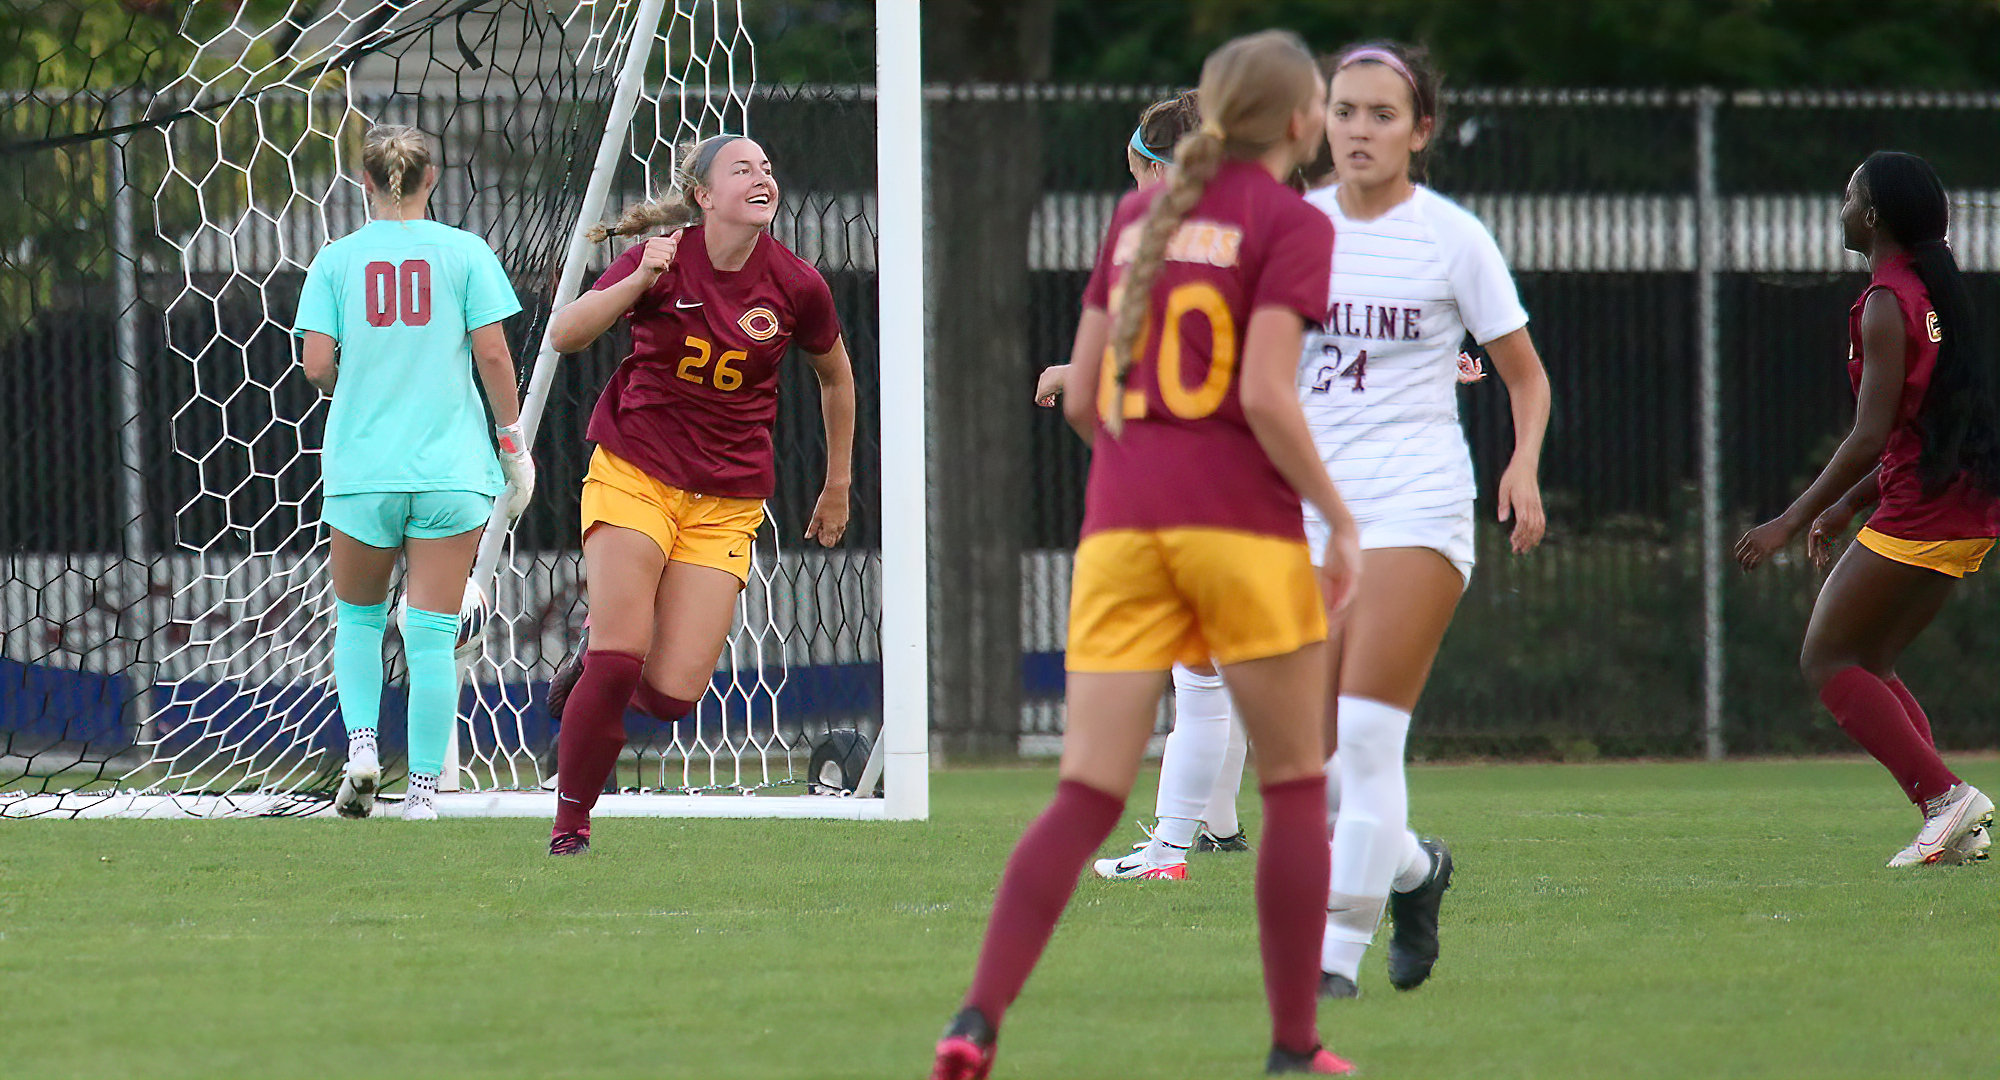 Senior Sophia Robinson celebrates her goal in the first half of the Cobbers' 1-0 win at Hamline (Photo courtesy of Ryan Coleman, D3photography)